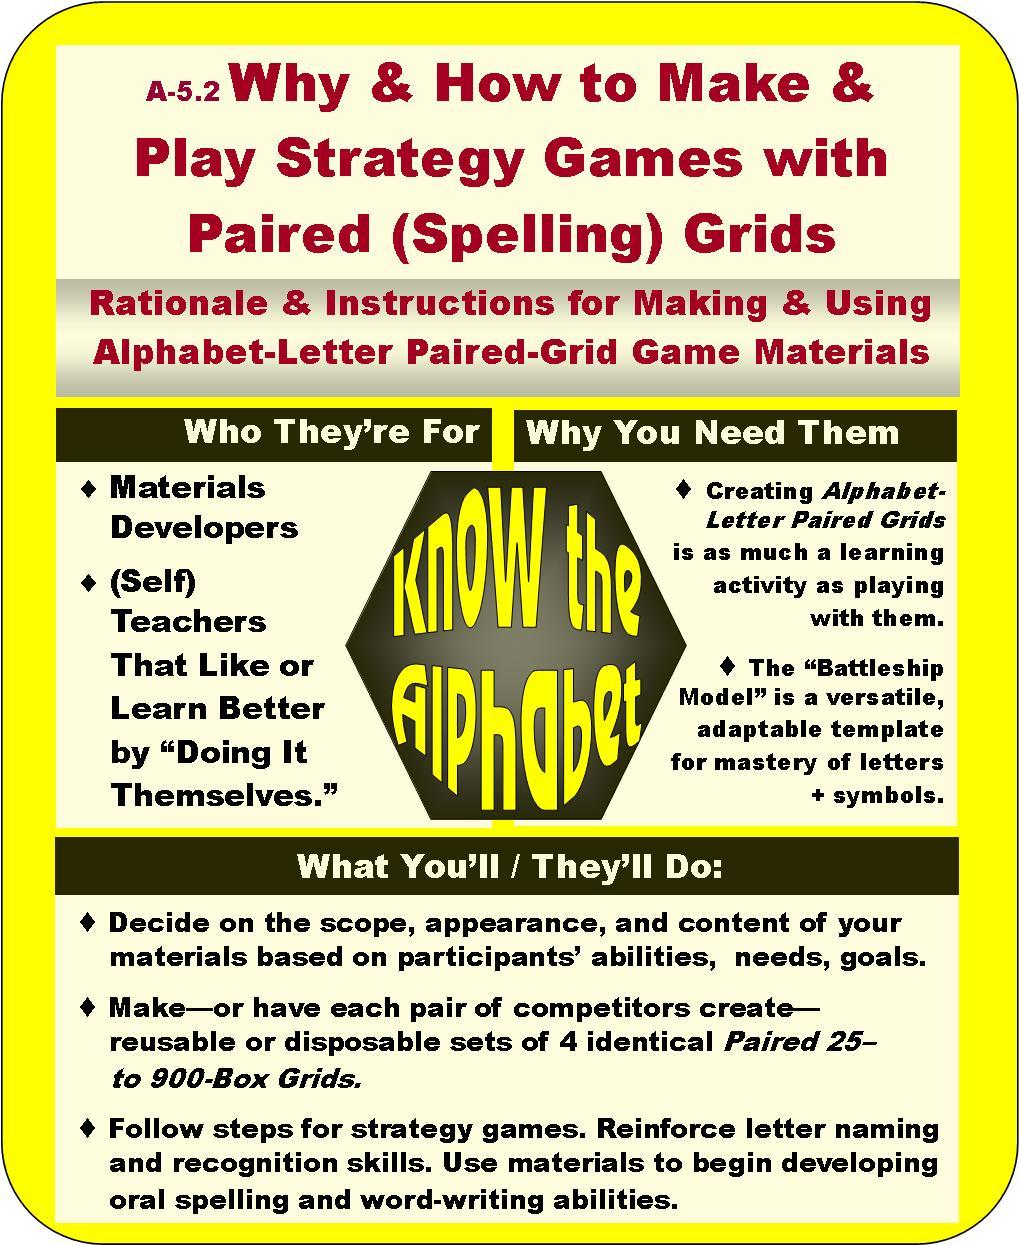 A-05.02: Learn Why & How to Make & Play Strategy Games with Paired (Spelling) Grids